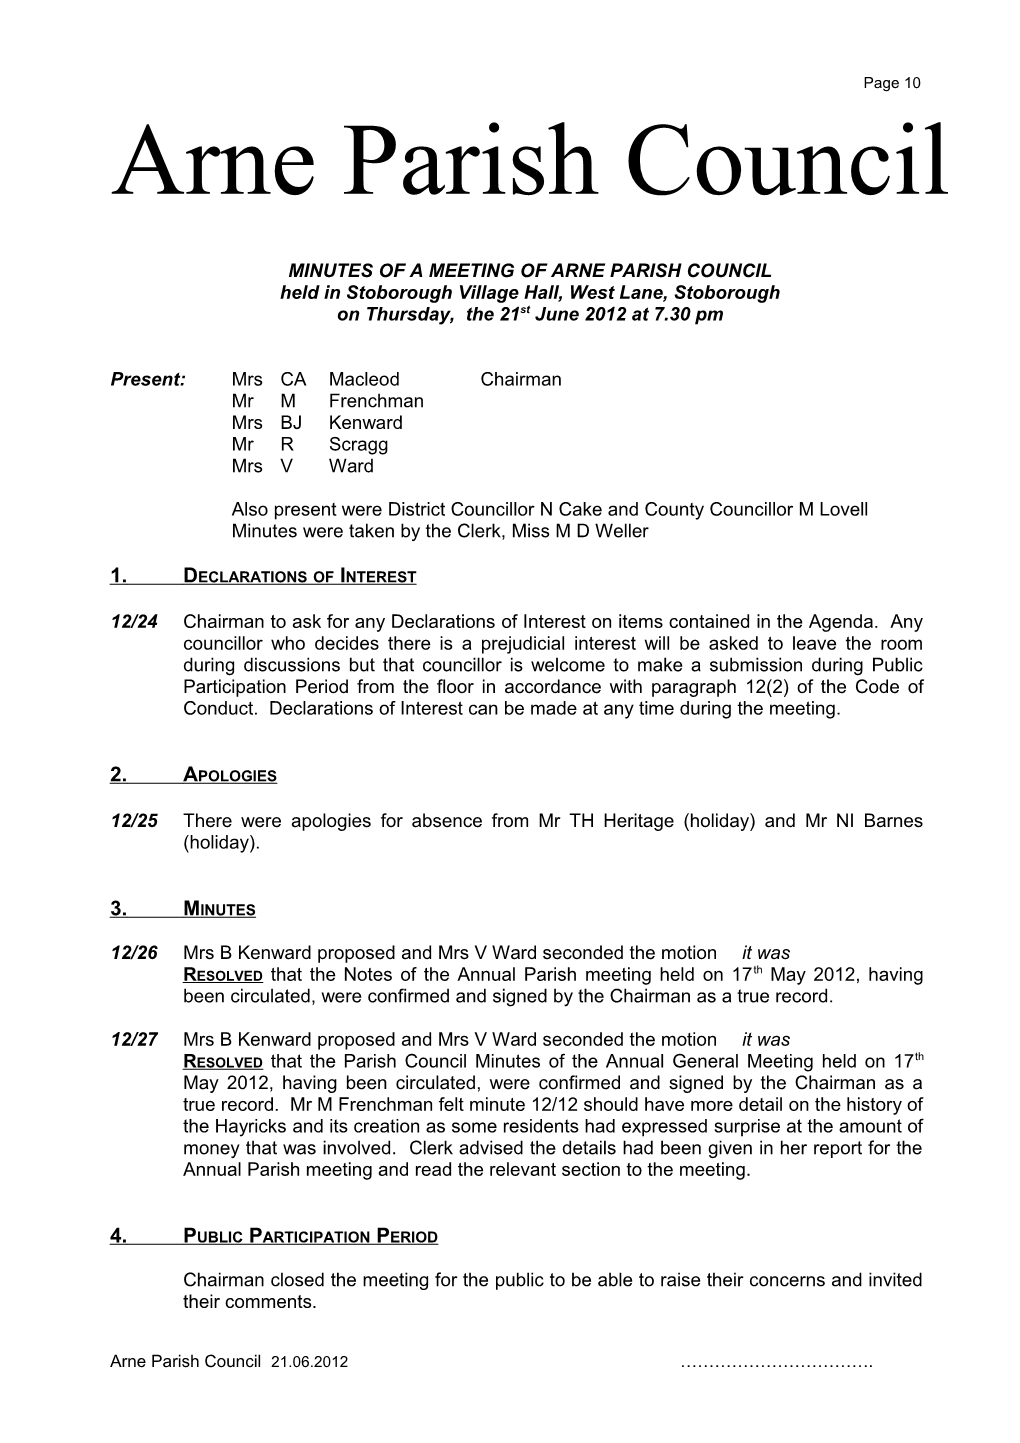 MINUTES of a Meeting of ARNE PARISH COUNCIL